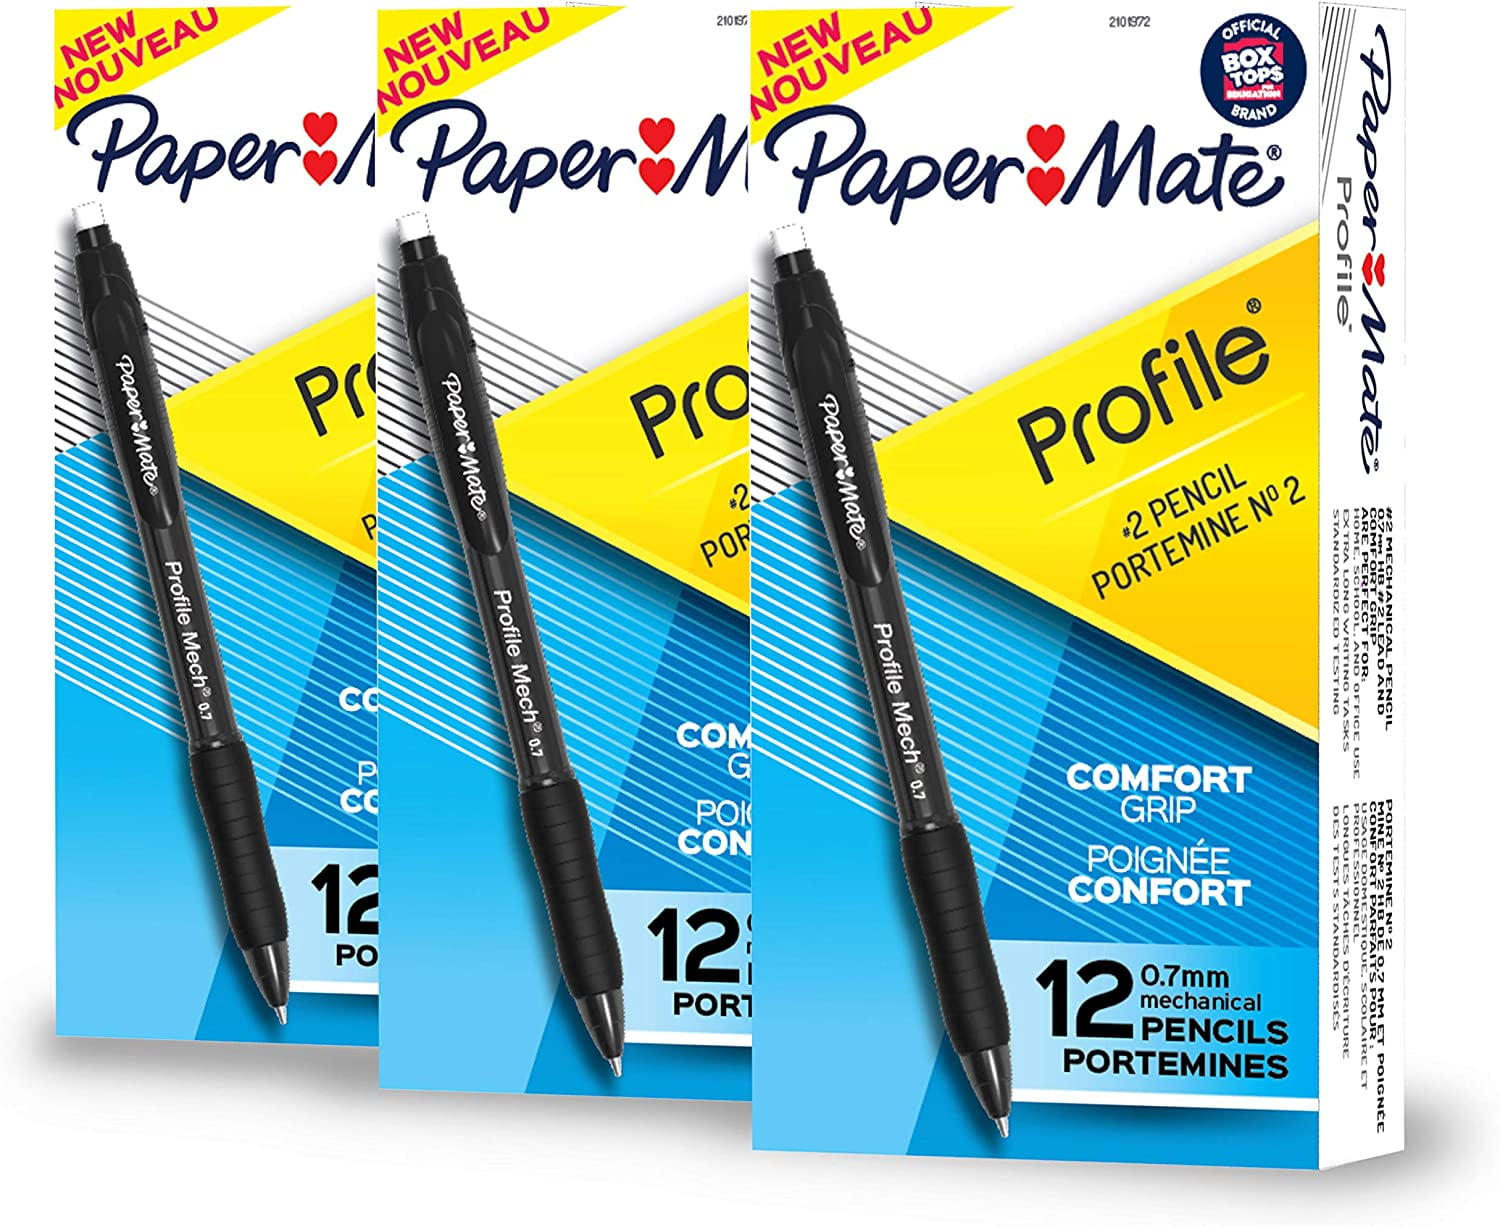 Paper Mate Assorted Colors 0.7 mm Mechanical Pencil (Pack of 10) 74403 -  The Home Depot